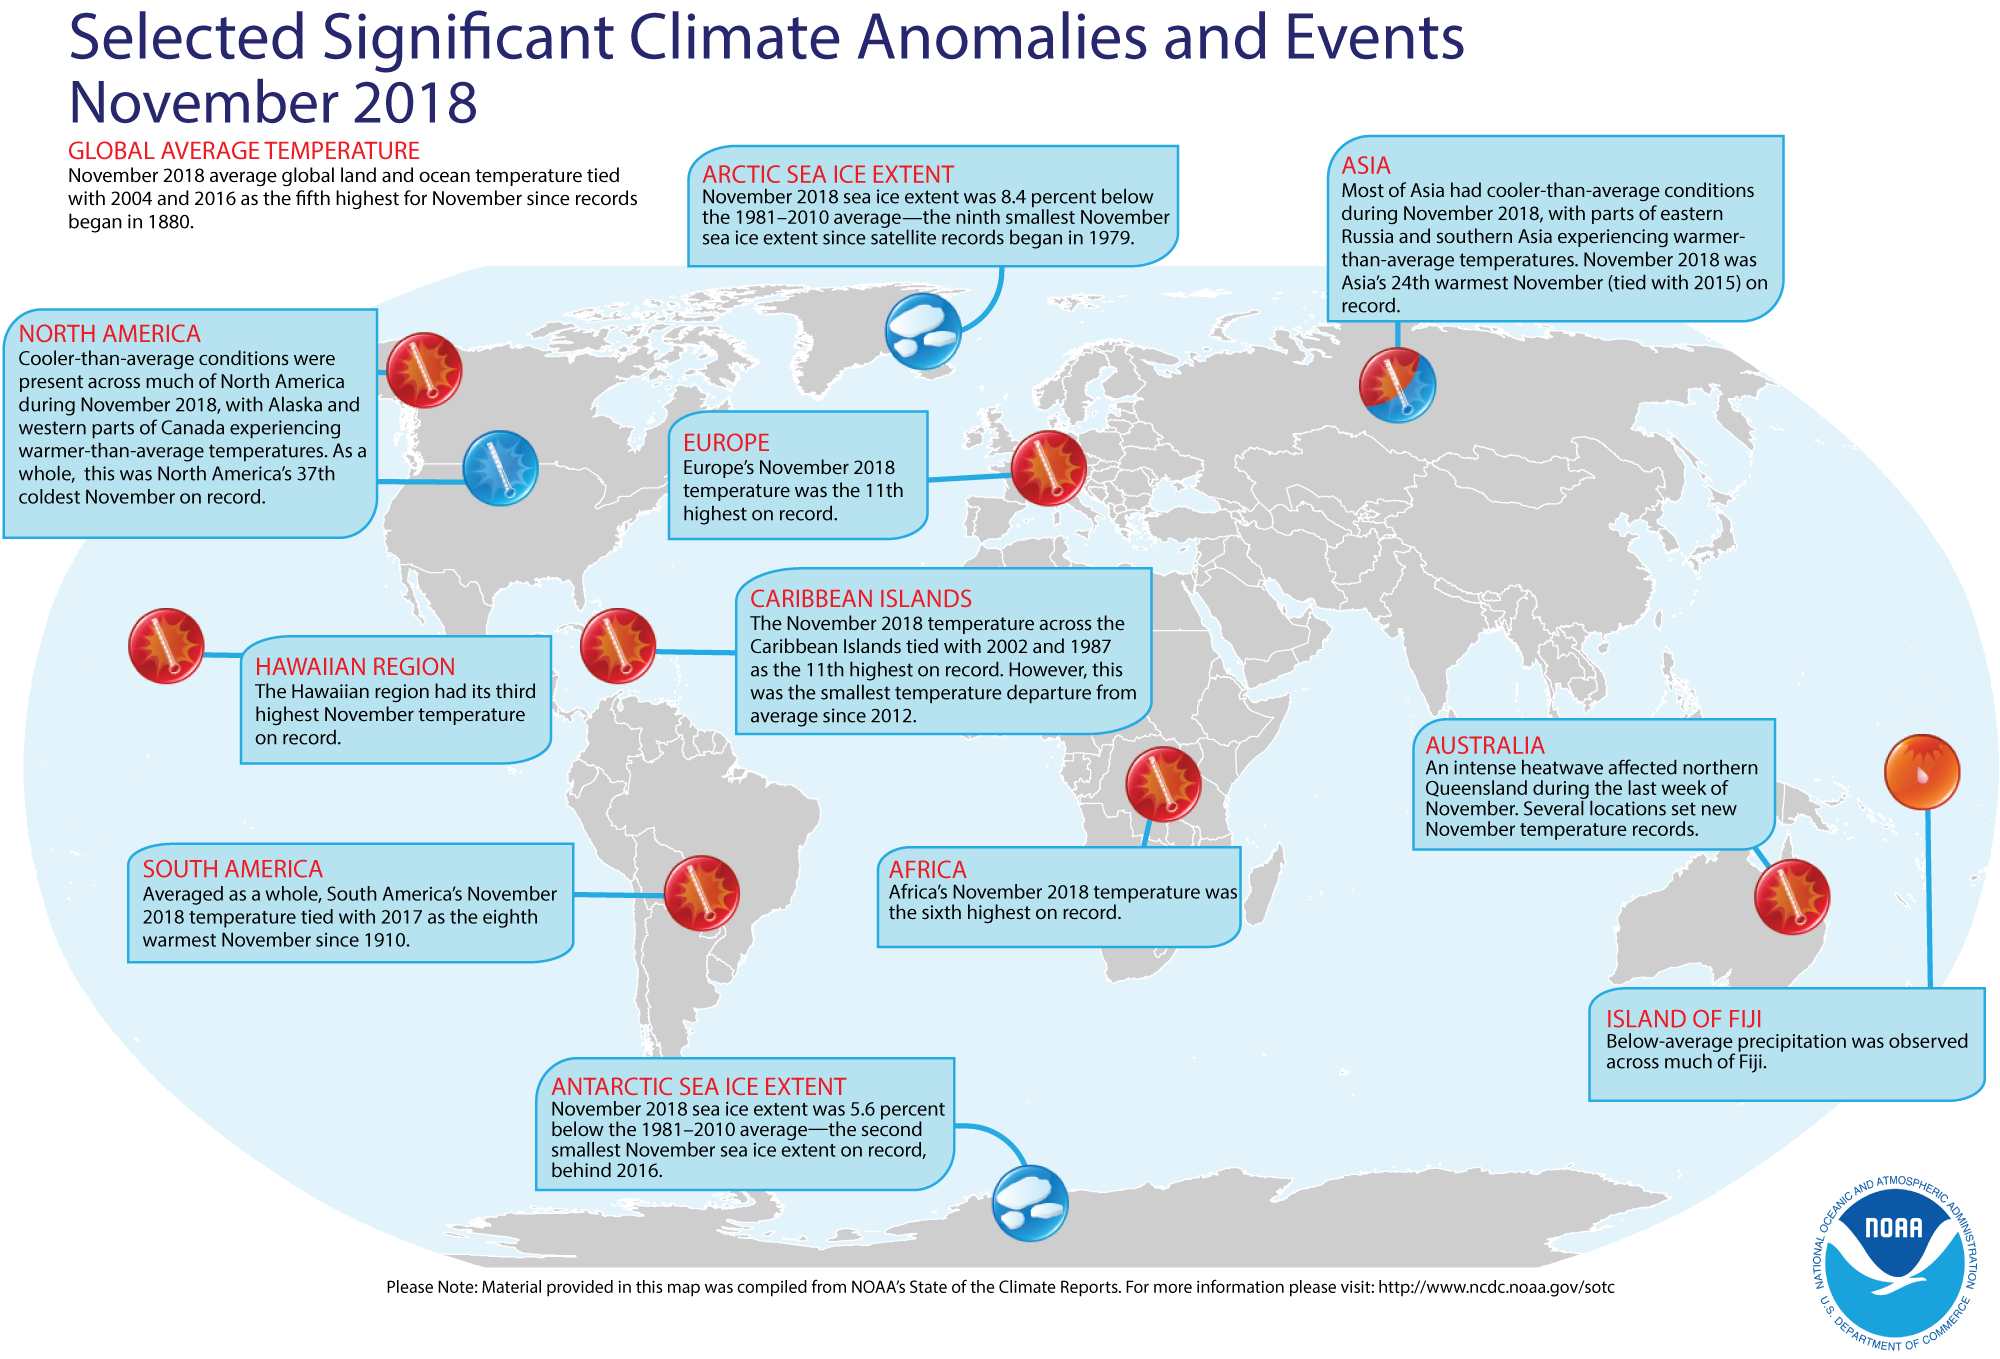 An annotated map of the world showing notable climate events that occurred in November 2018. For details, see the short bulleted list below in our story and an more details at http://www.ncdc.noaa.gov/sotc/global/2018/11.